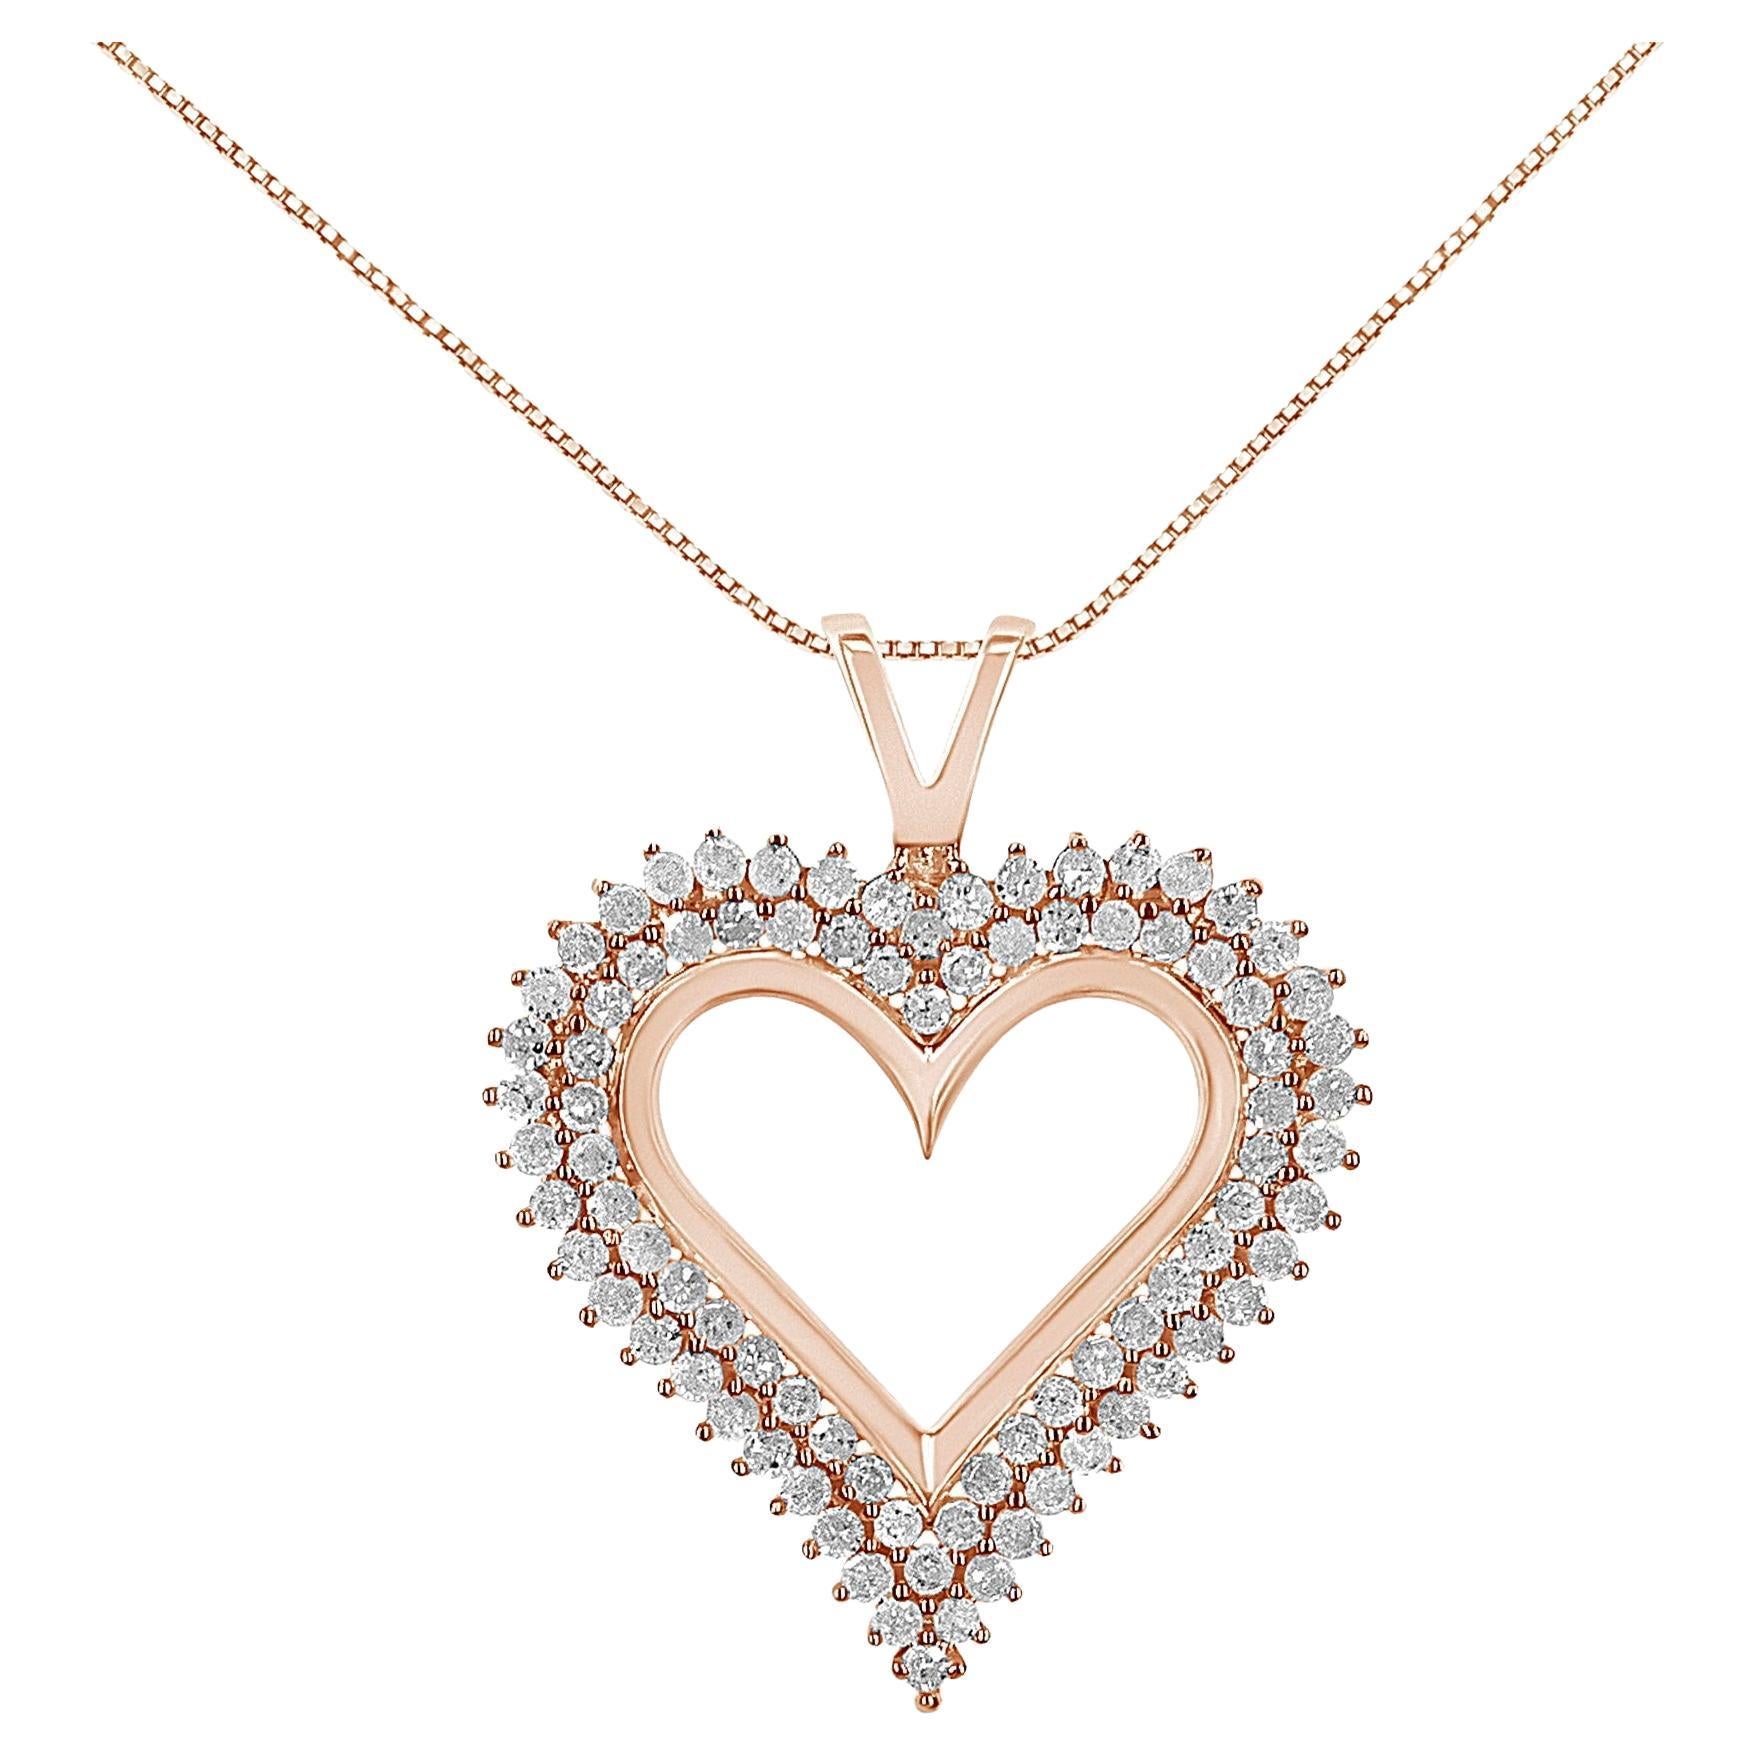 10K Rose Gold Plated Sterling Silver 2.0 Carat Diamond Heart Pendant Necklace